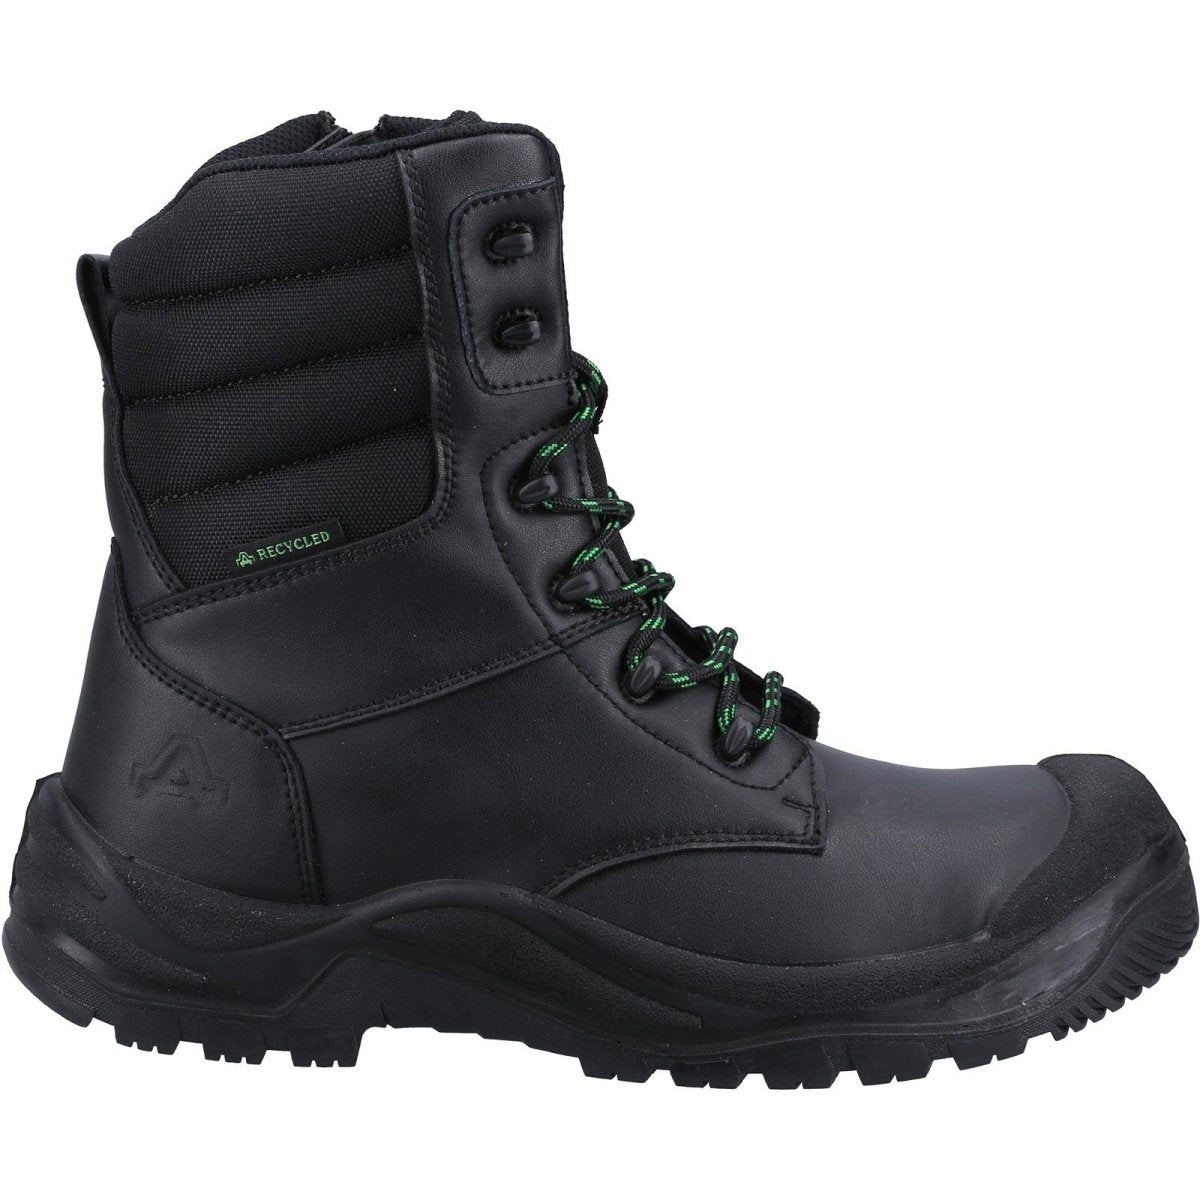 Amblers Safety 503 Safety Boots - Shoe Store Direct